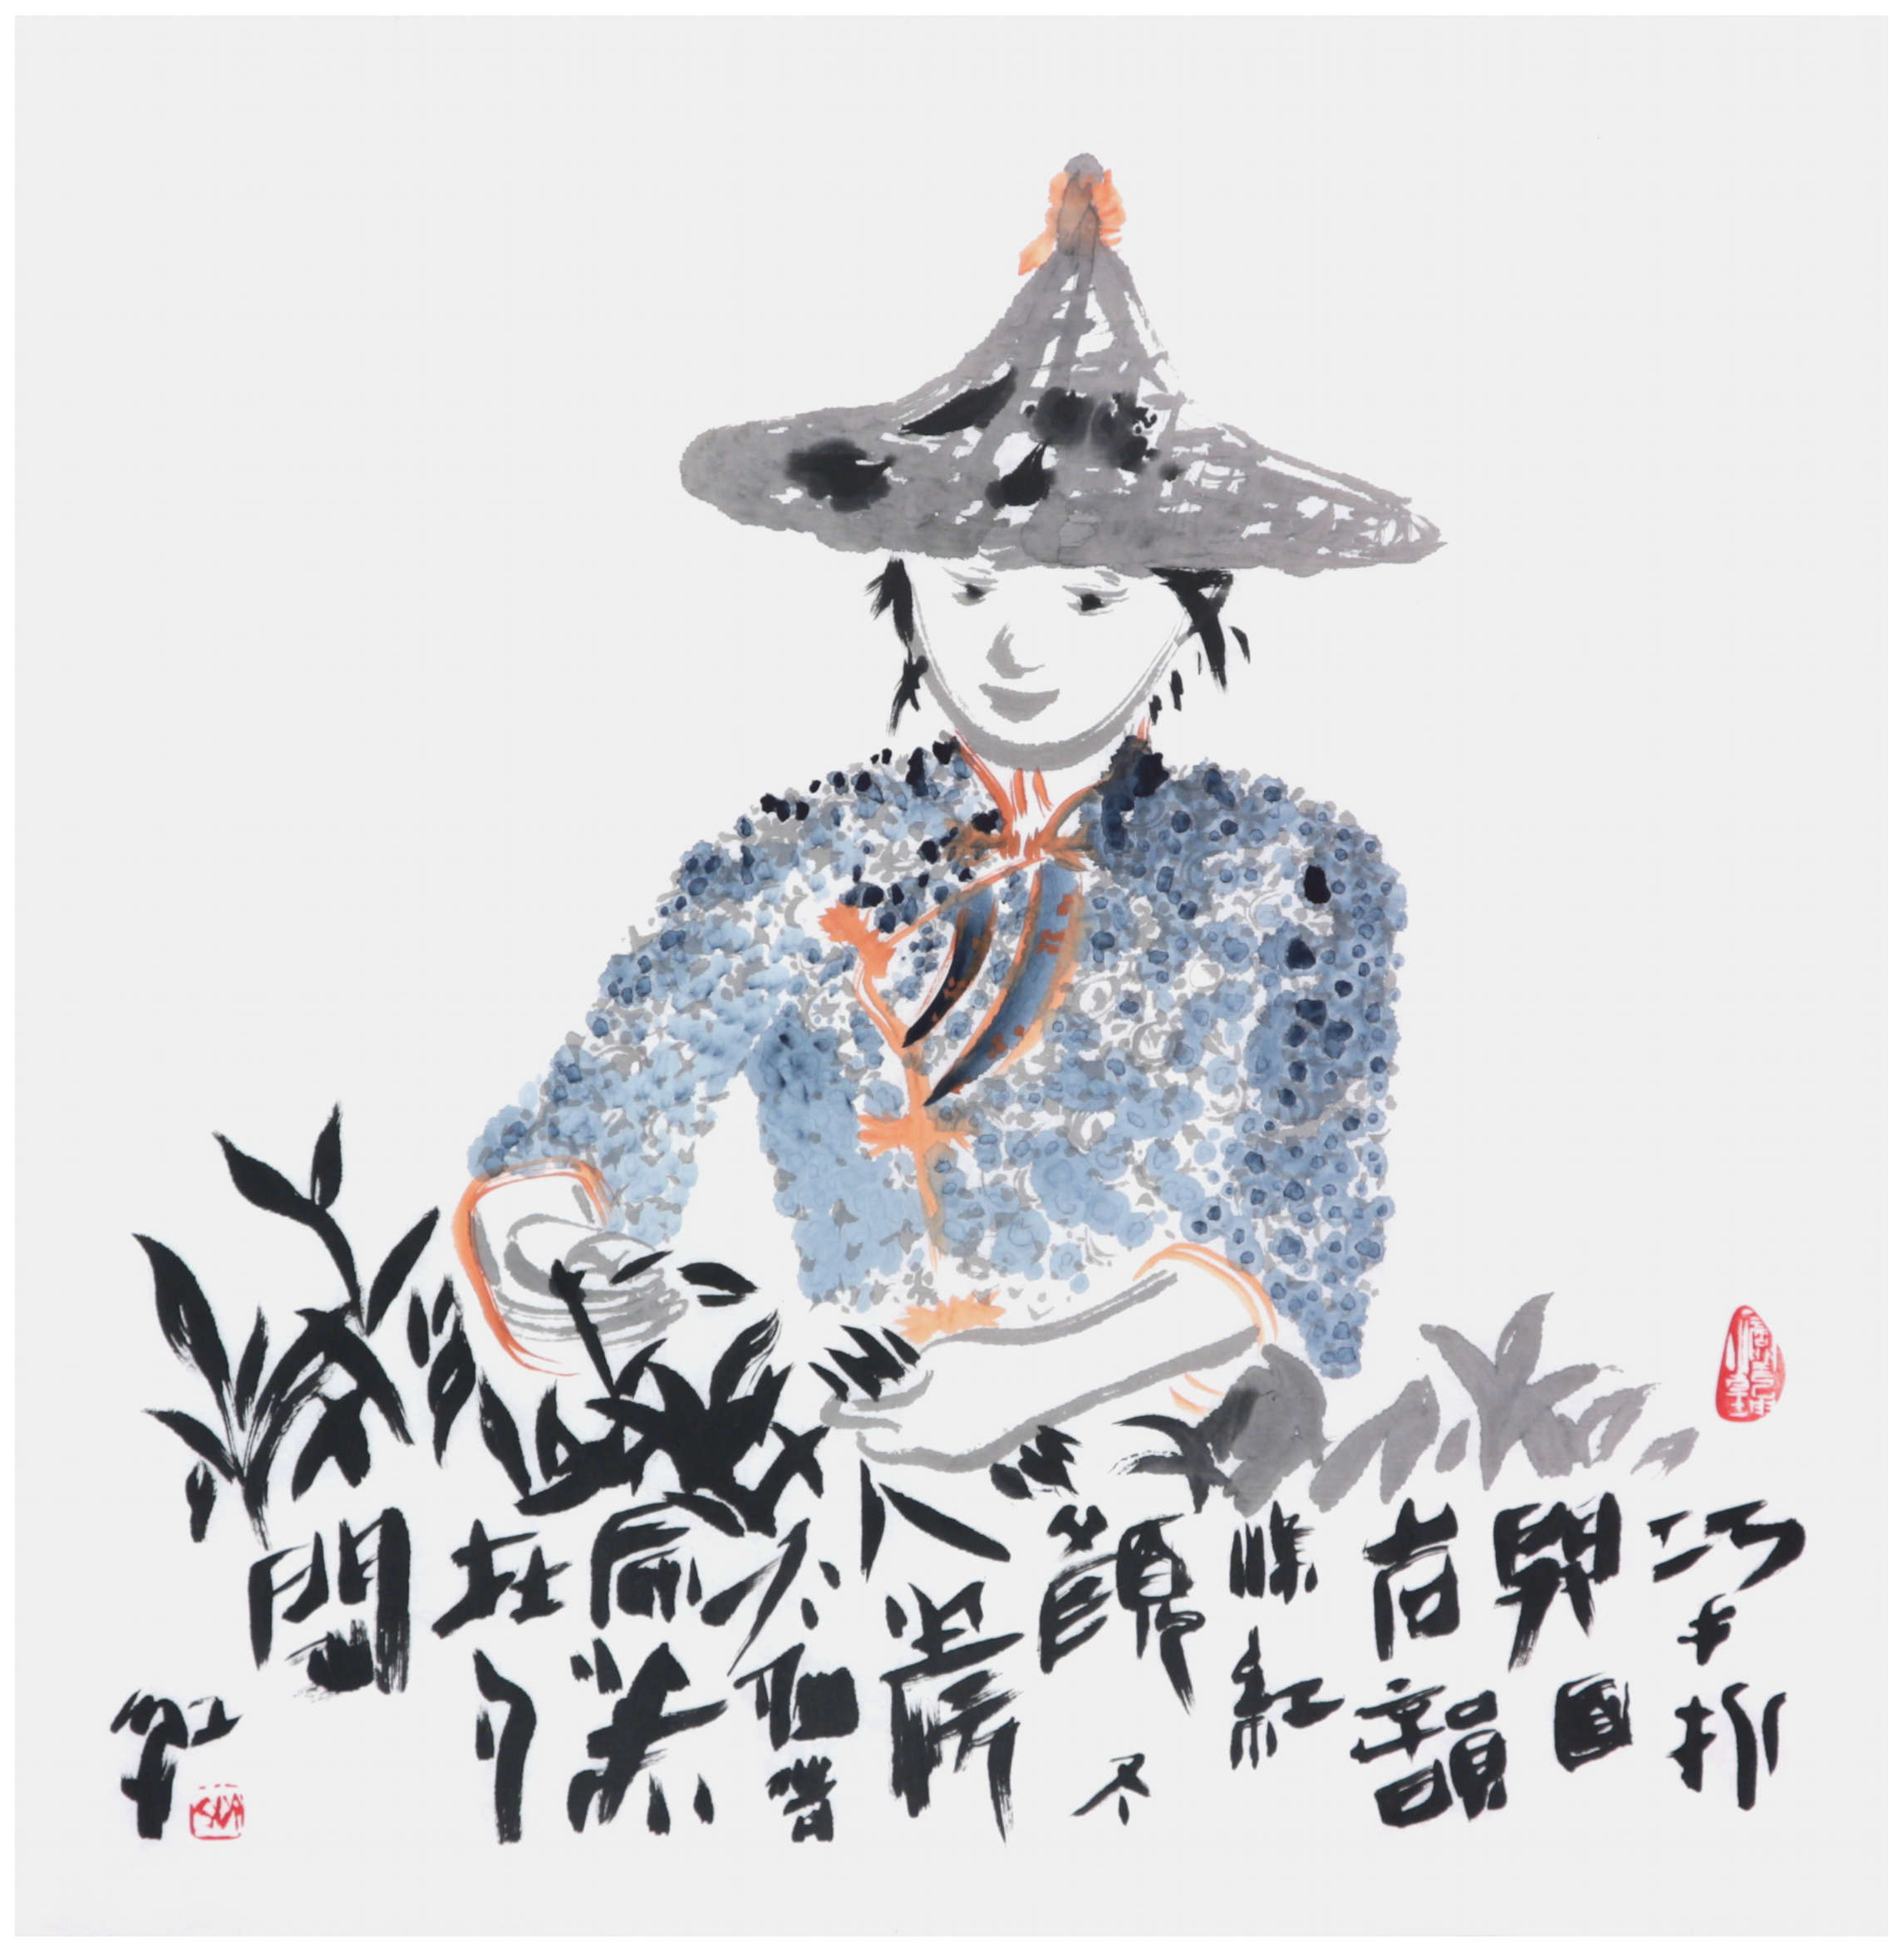 Sai Koh (Qi Hong)’s freehand brushwork Chinese painting (aka, figure painting,  literati painting,  ink wash painting, ink painting, ink brush painting): A Tea-picking Girl in Mount Wuyi, 69×68cm, ink & color on Mian Liao Mian Lian Xuan paper